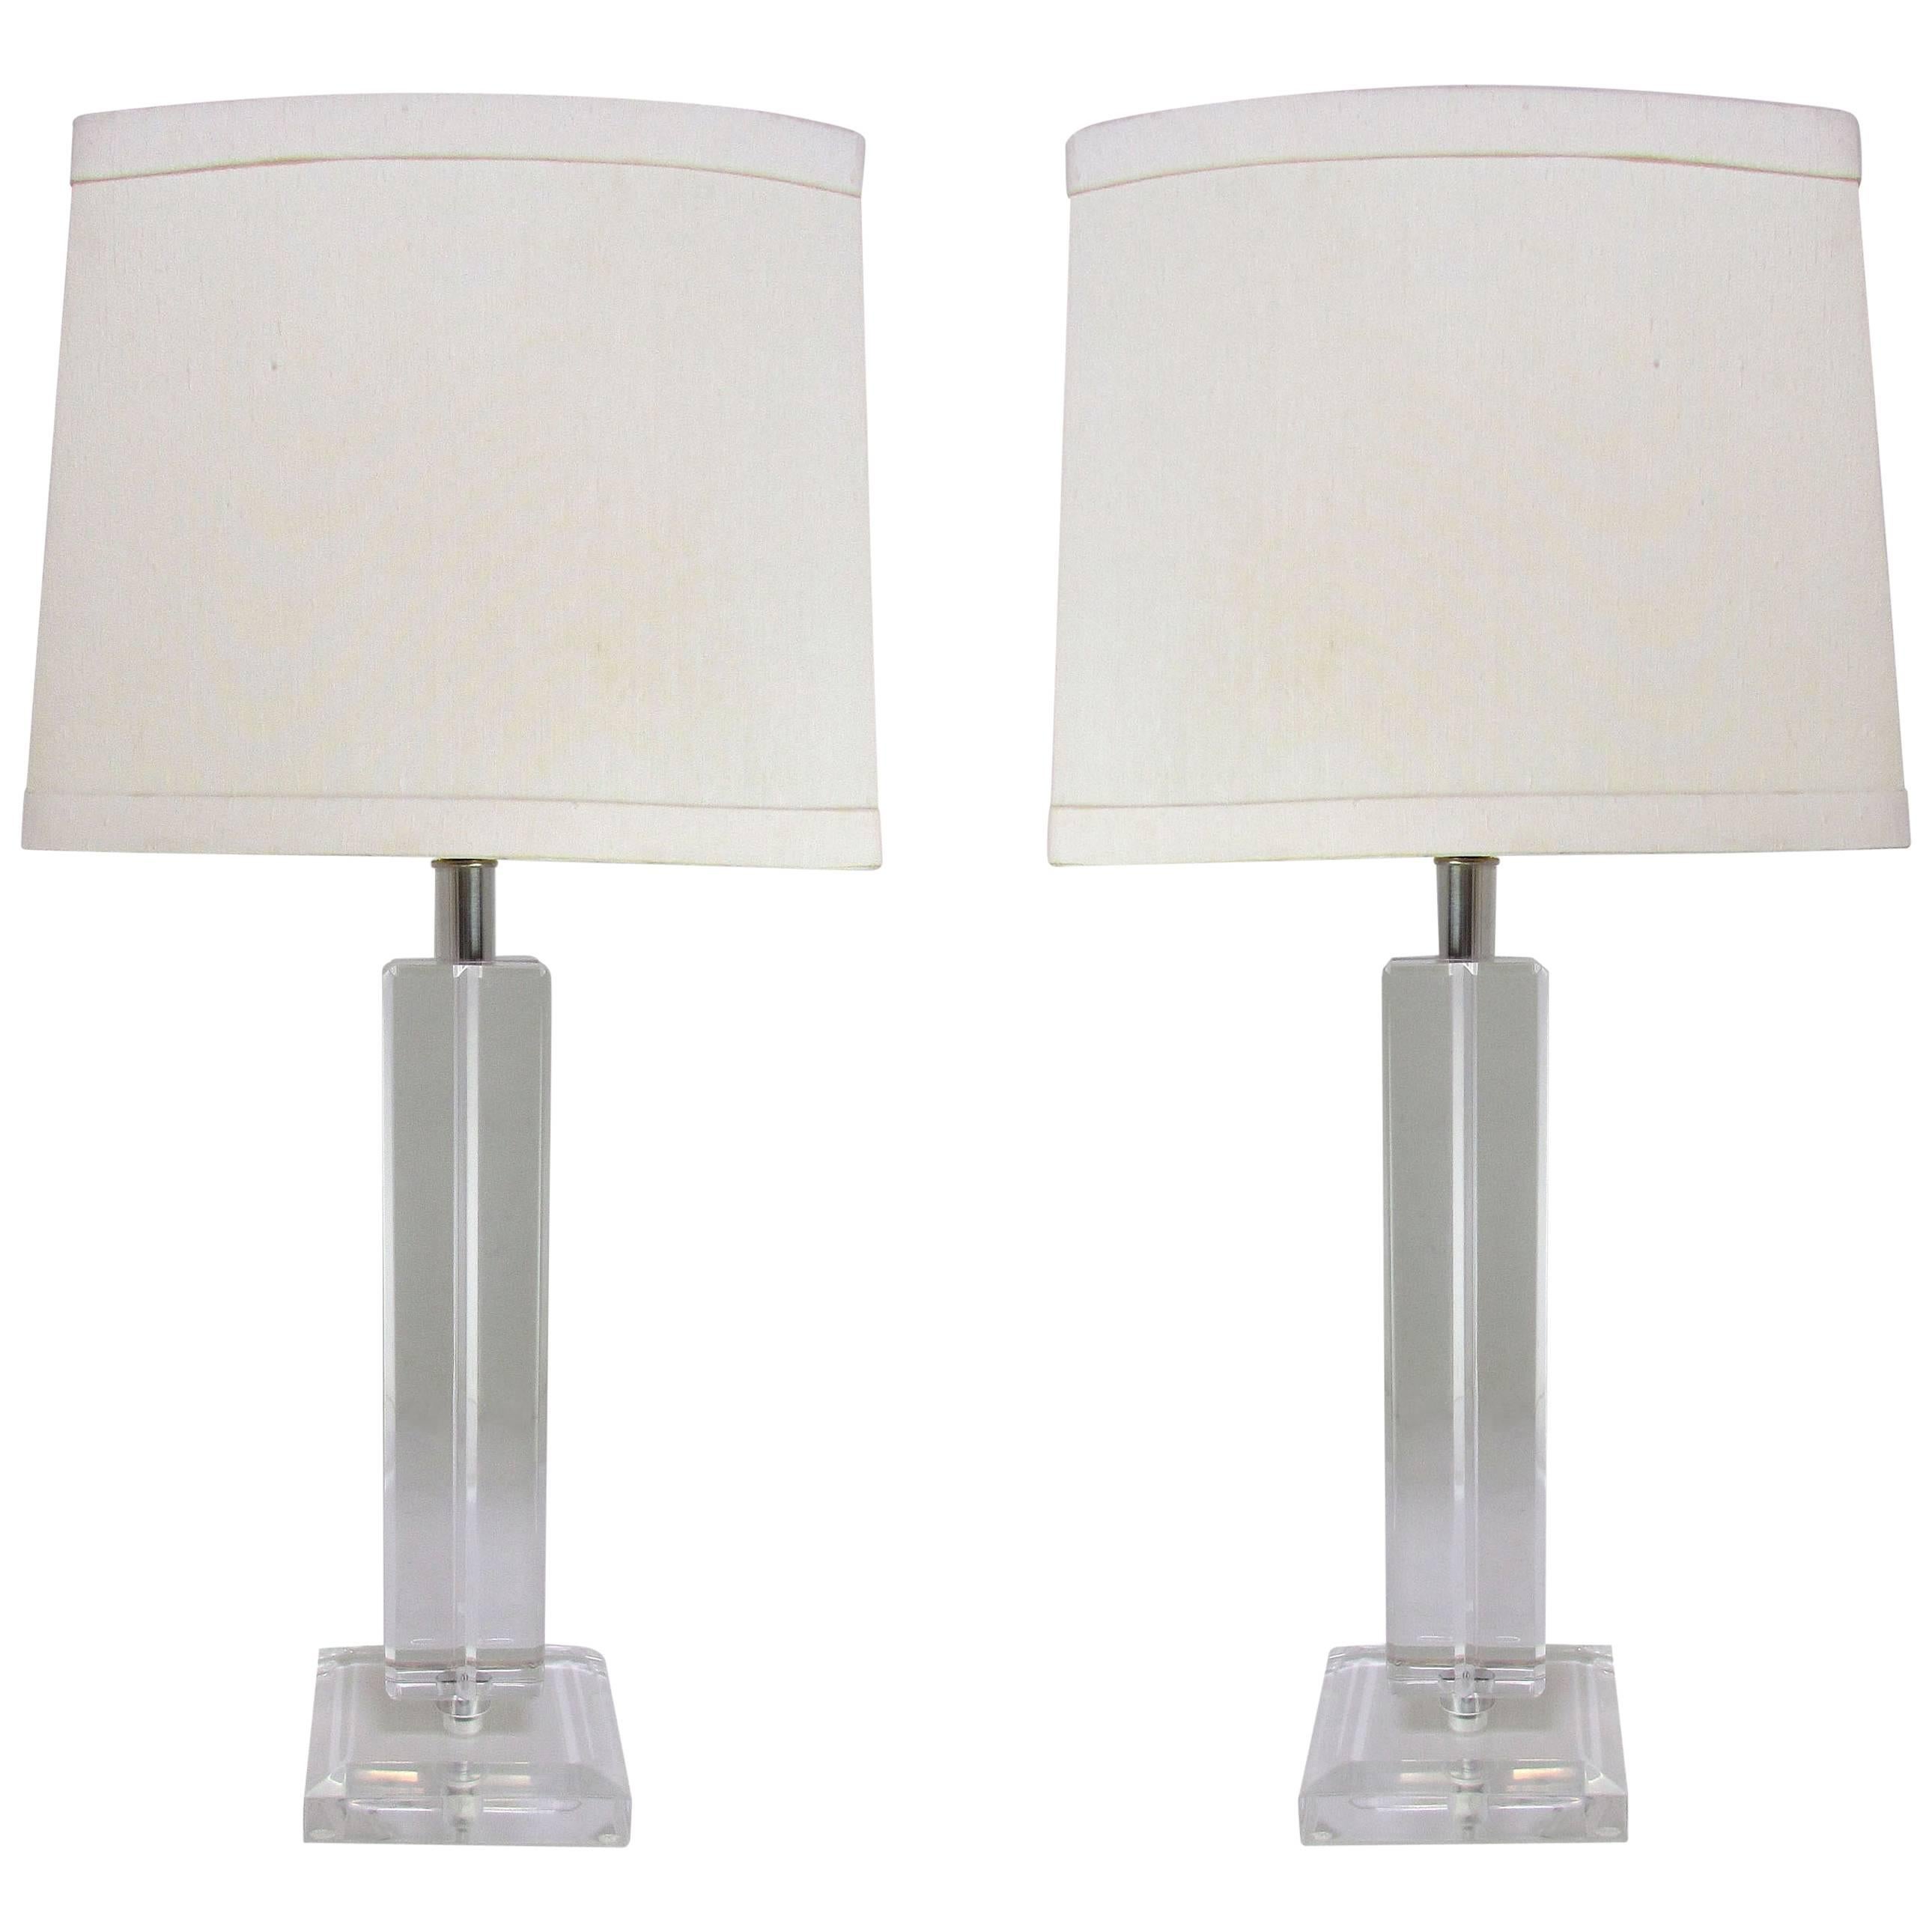 Pair of Lucite Table Lamps by Ritts Co.